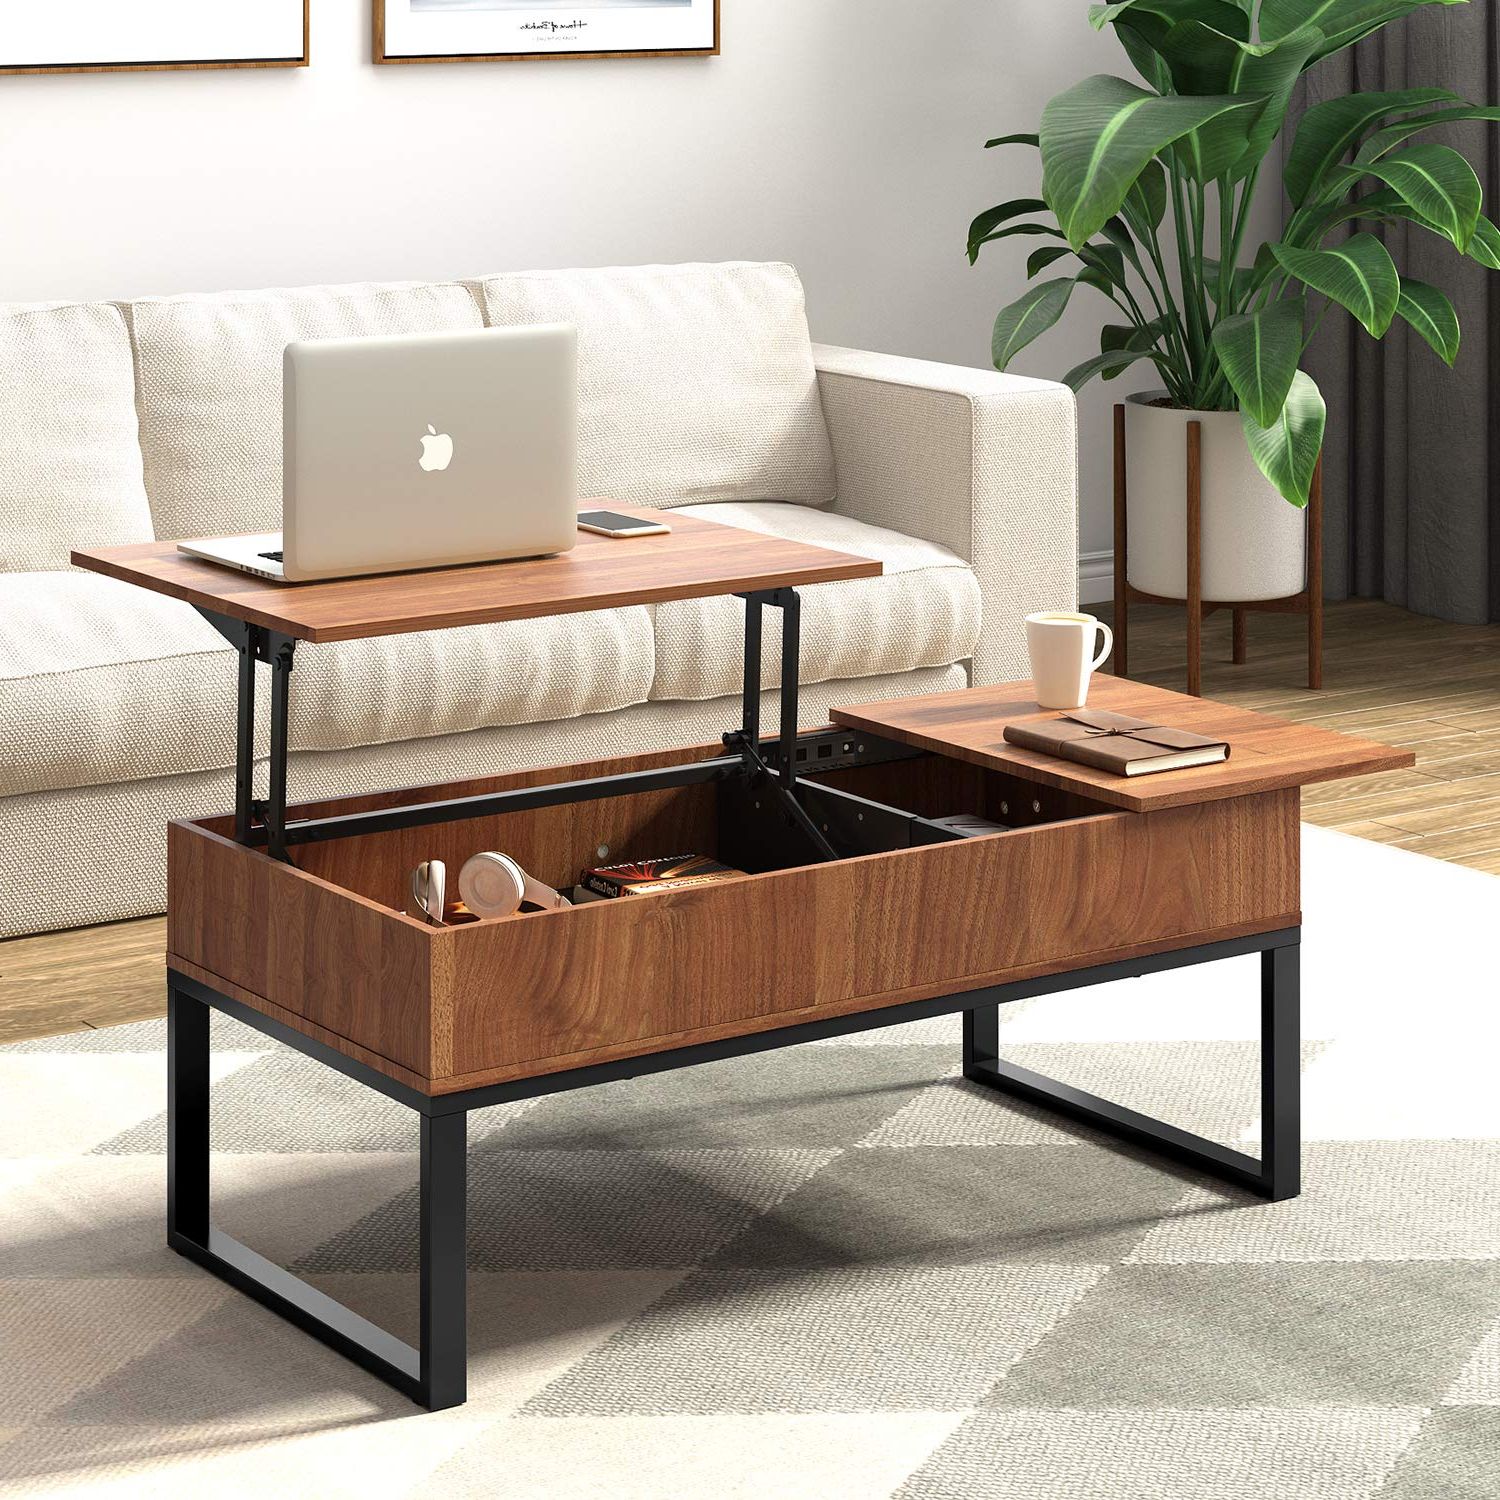 Lift Top Coffee Tables With Hidden Storage Compartments Regarding Famous Wlive Wood Coffee Table With Adjustable Lift Top Table, Metal Frame (View 8 of 15)